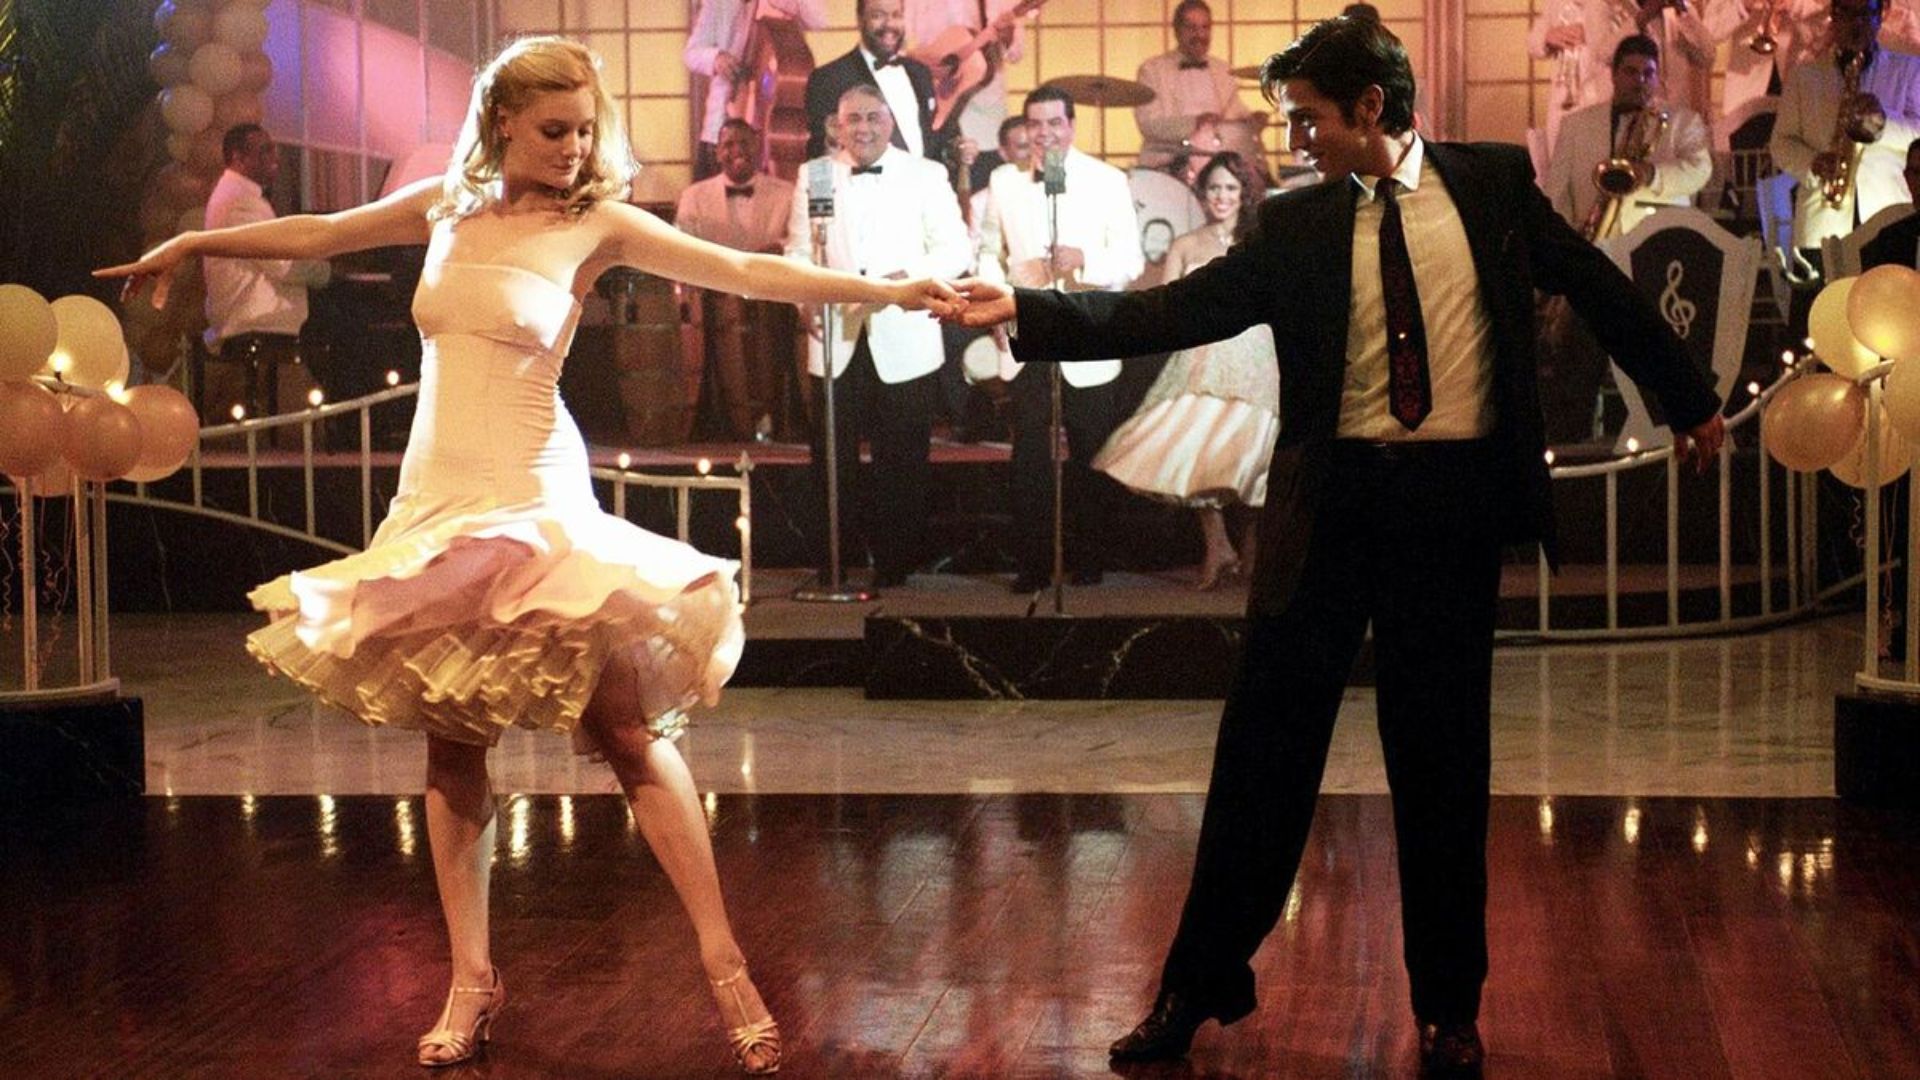 The Dirty Dancing spin-off, released in 2004, featured Patrick Swayze